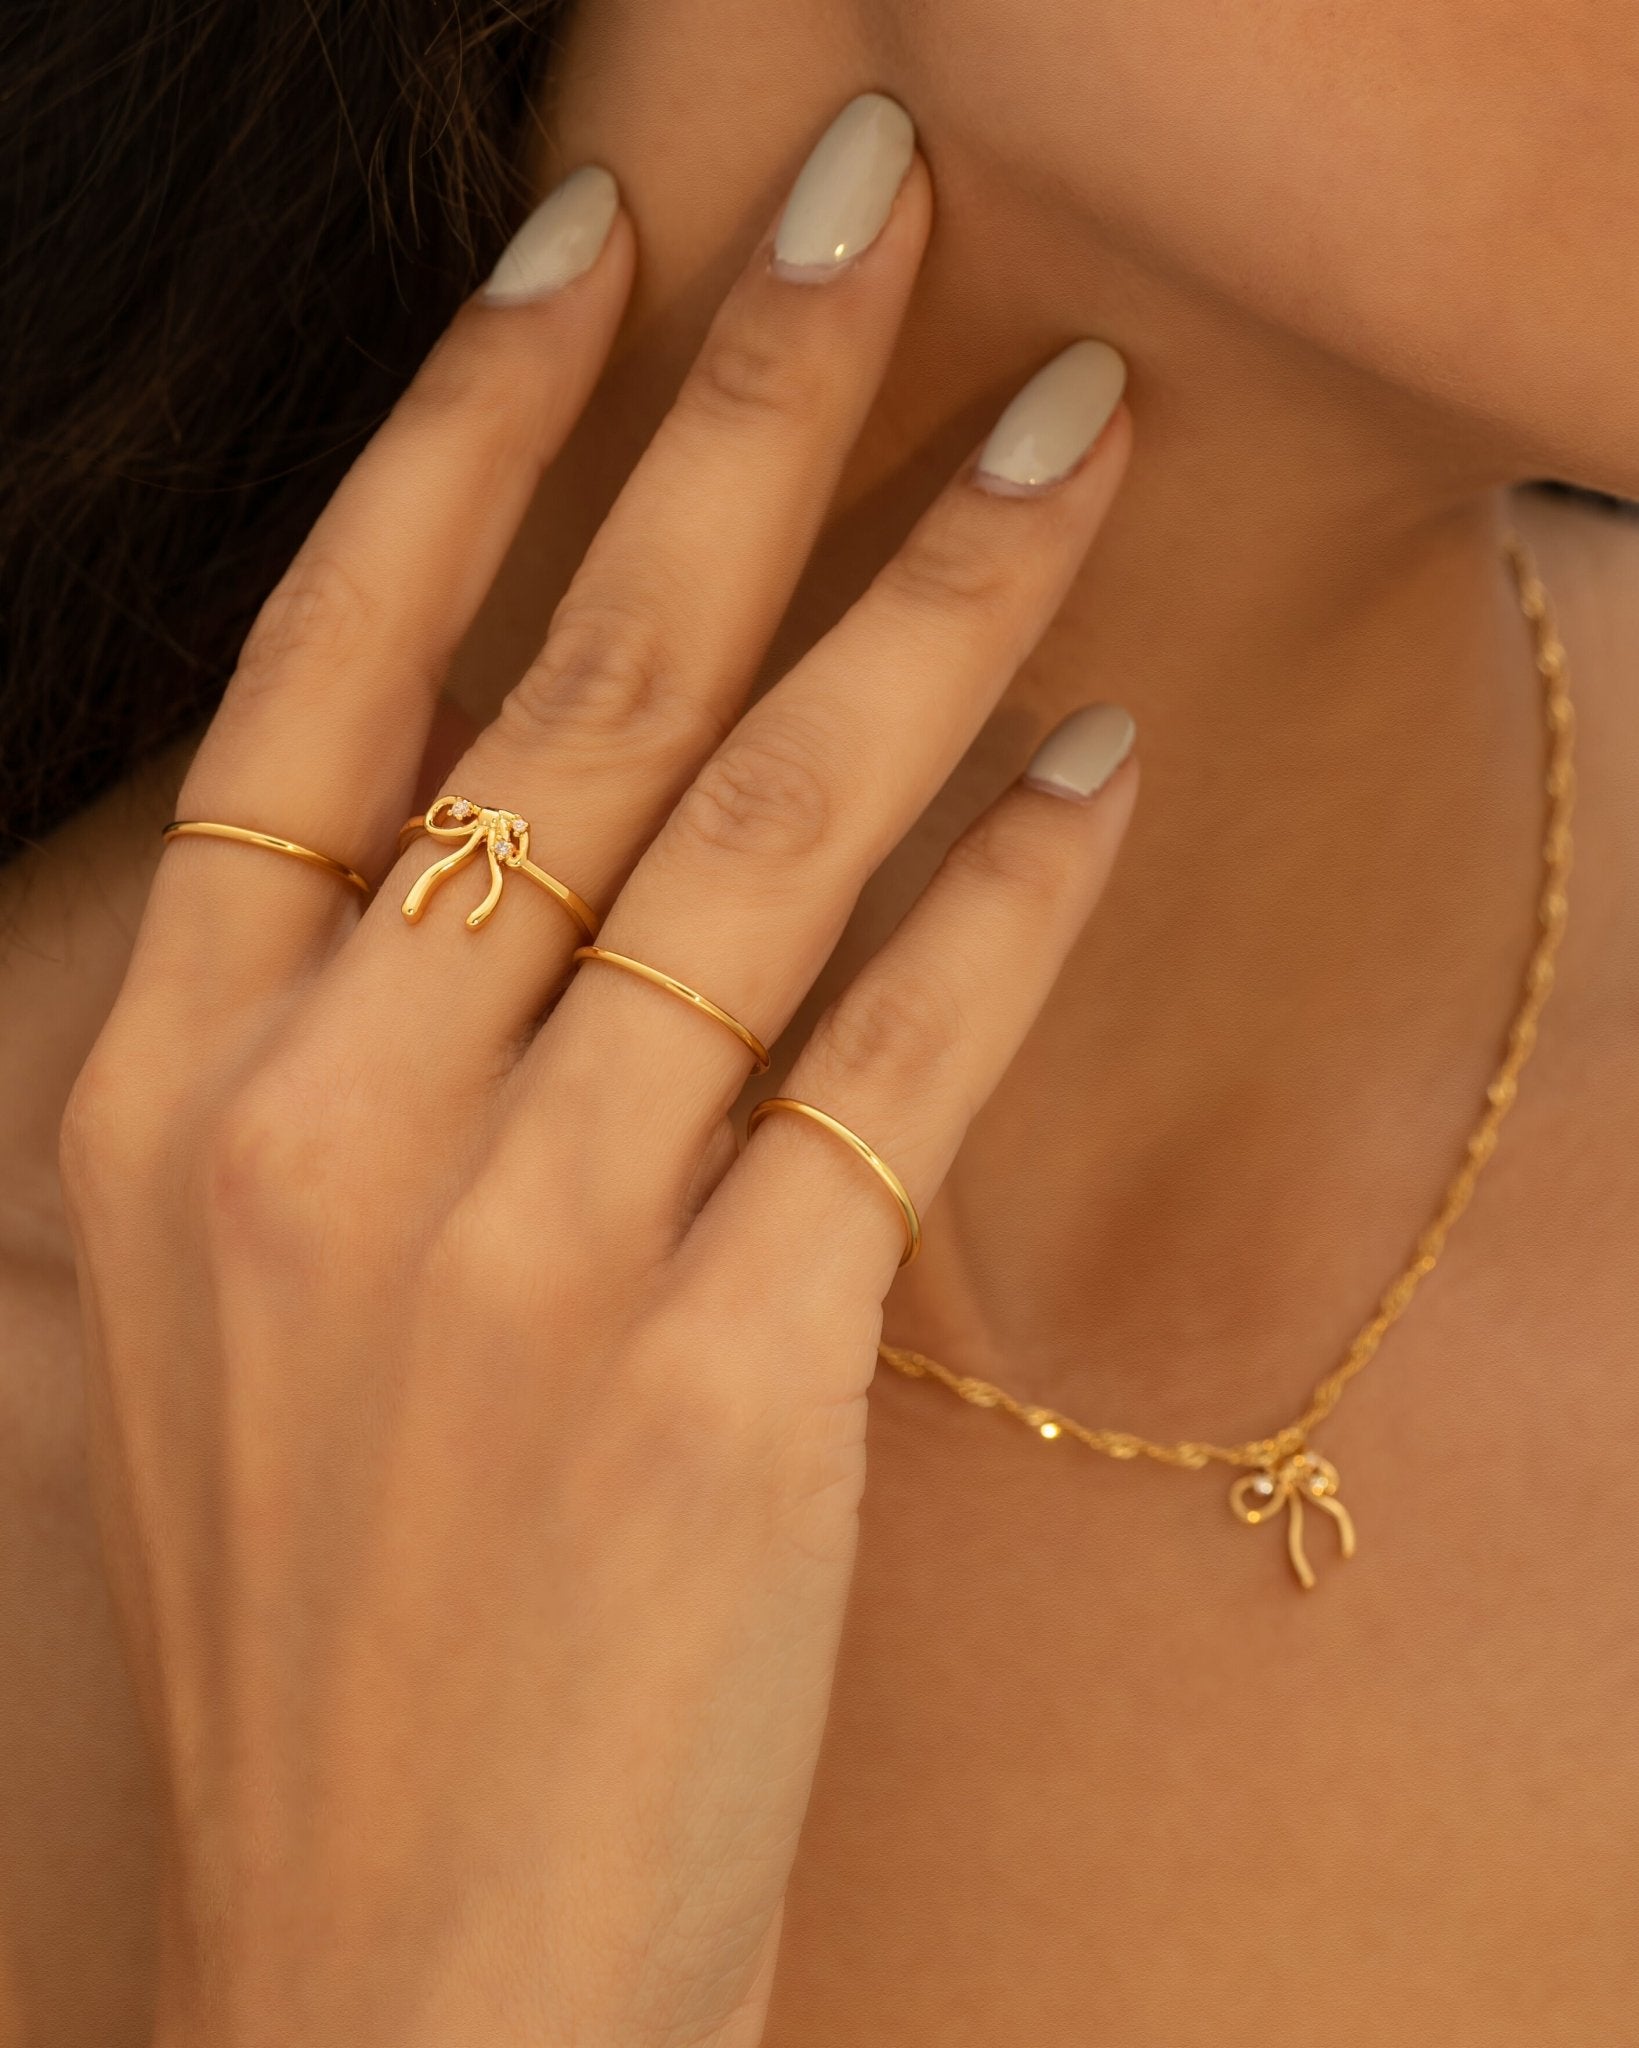 The Miffy Anillo in Gold